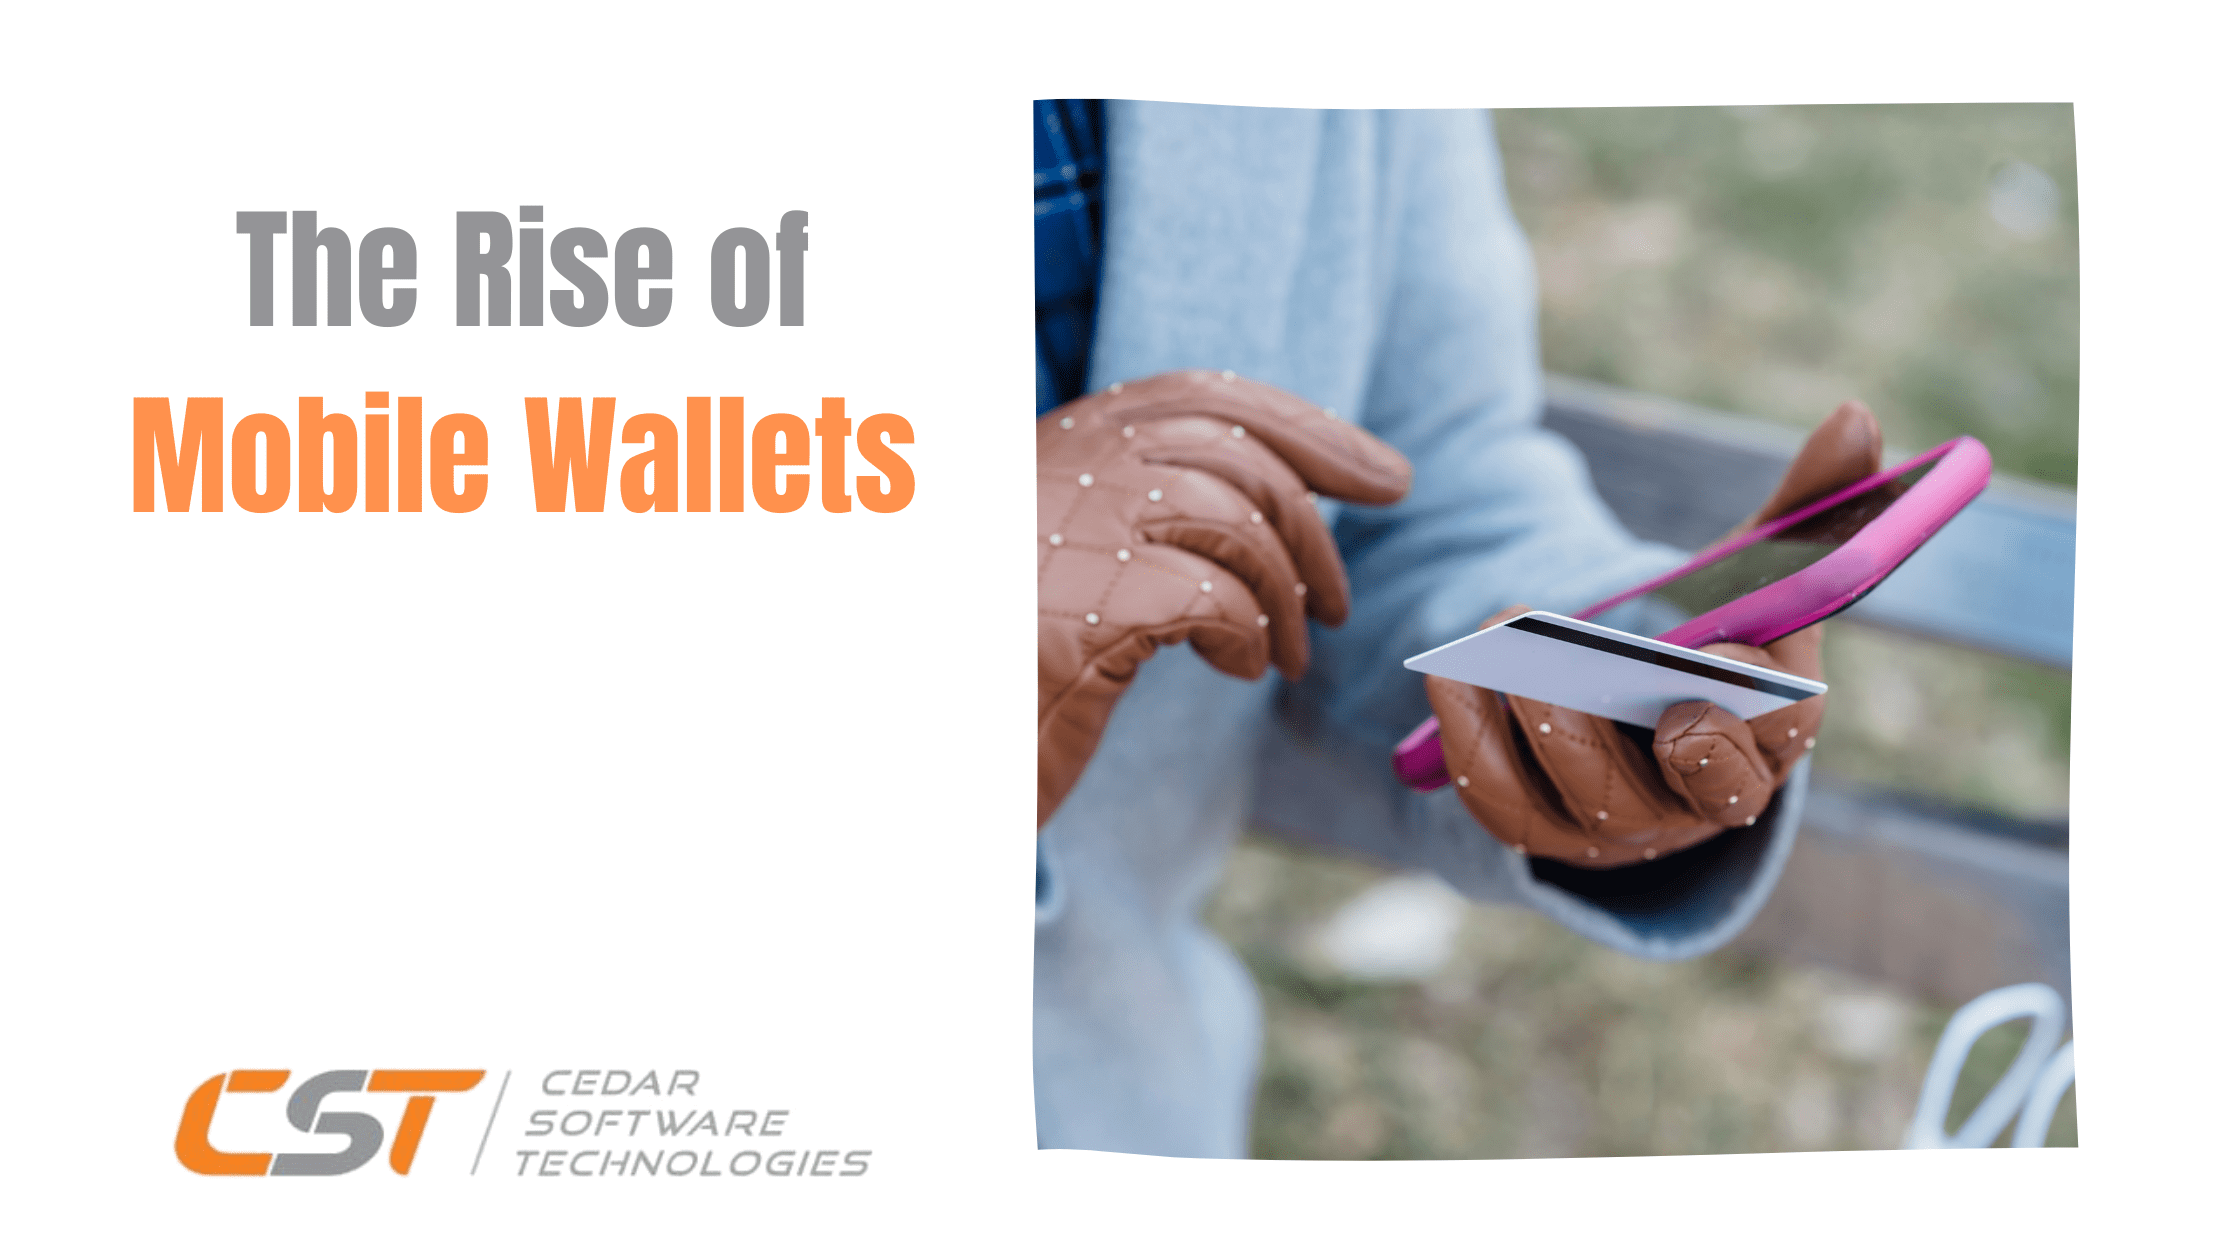 The Rise of Mobile Wallets